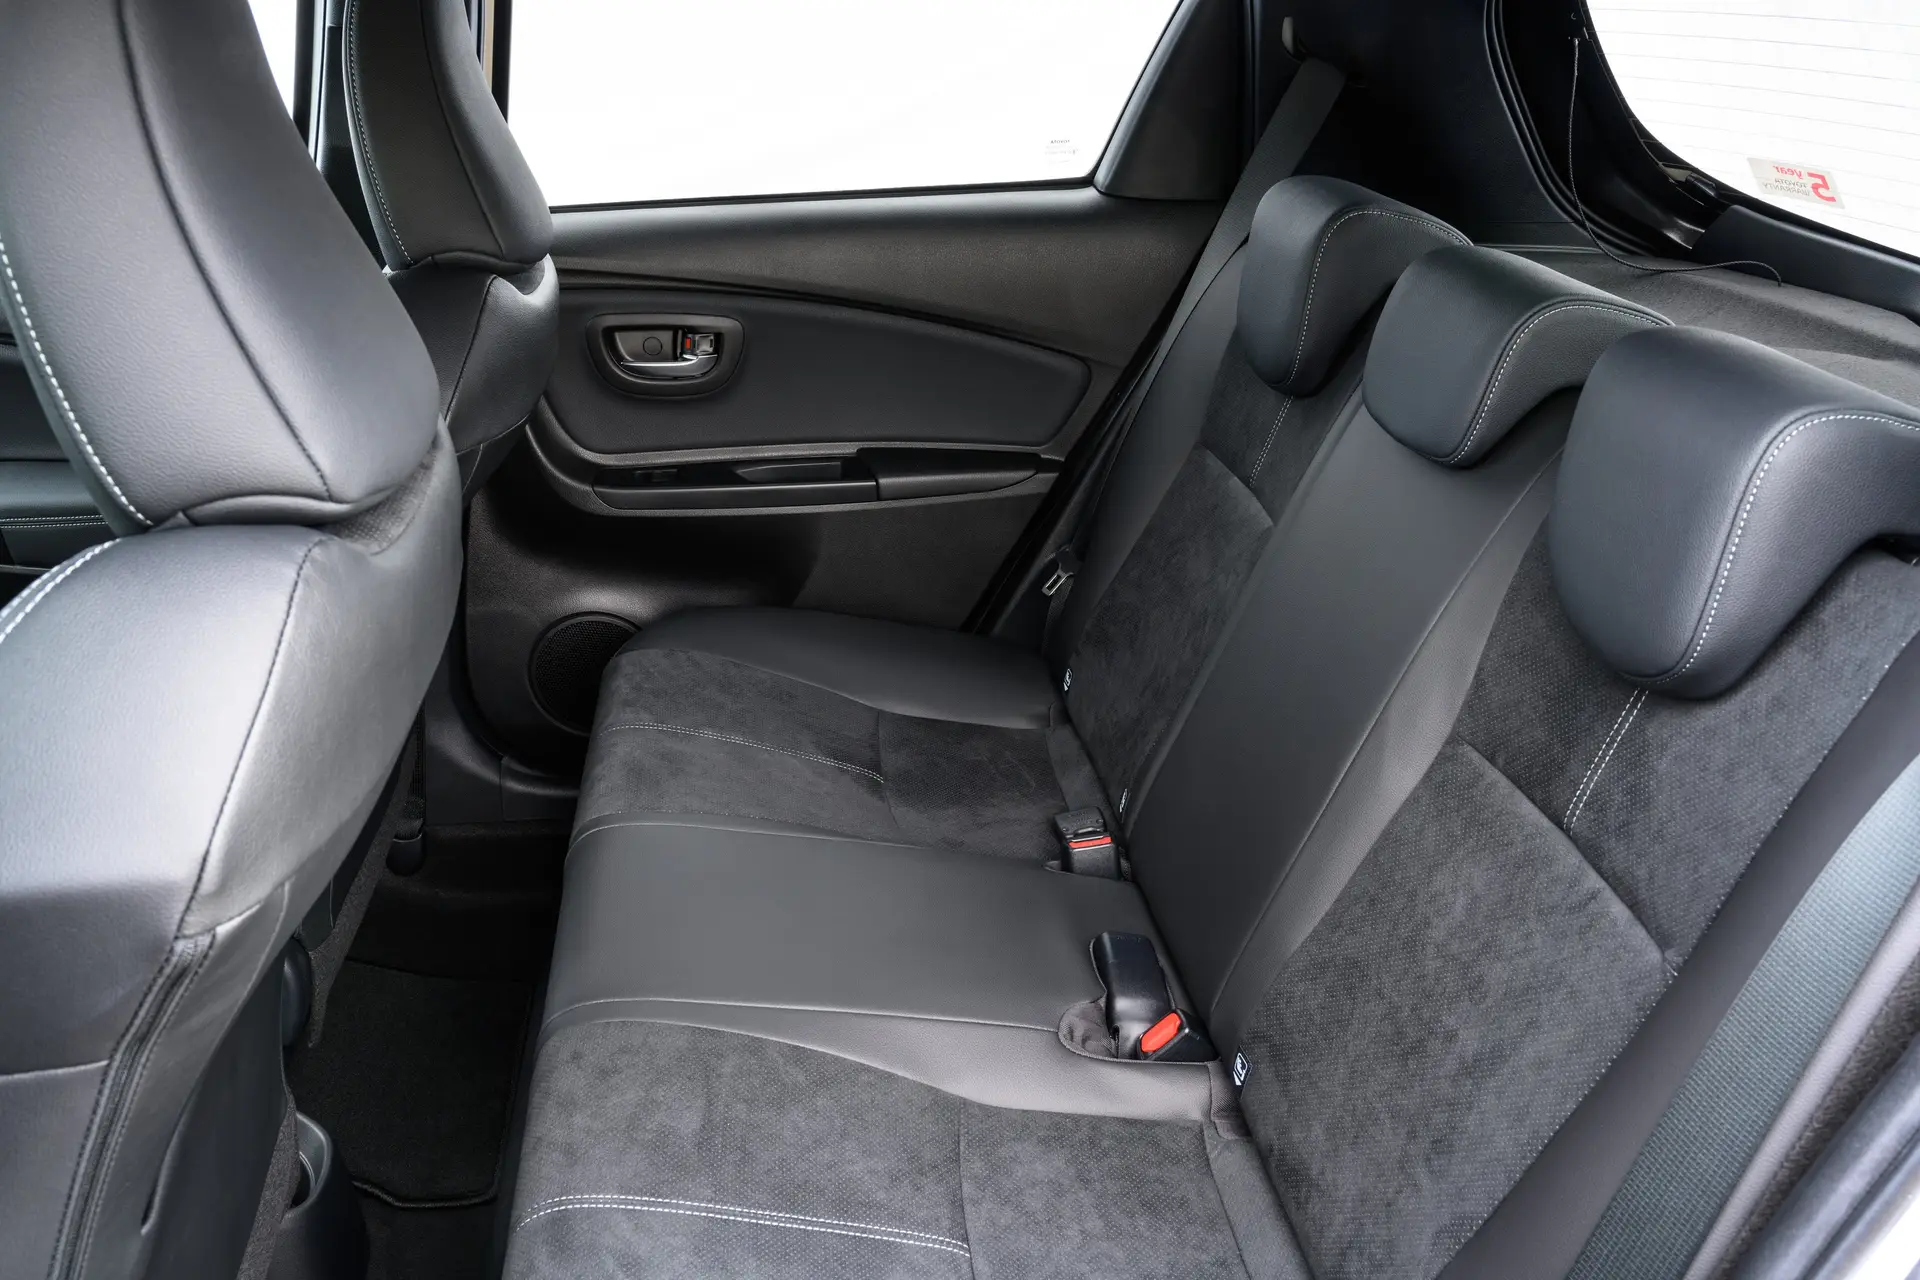 Toyota Yaris (2011-2020) Review: interior close up photo of the Toyota Yaris rear seats